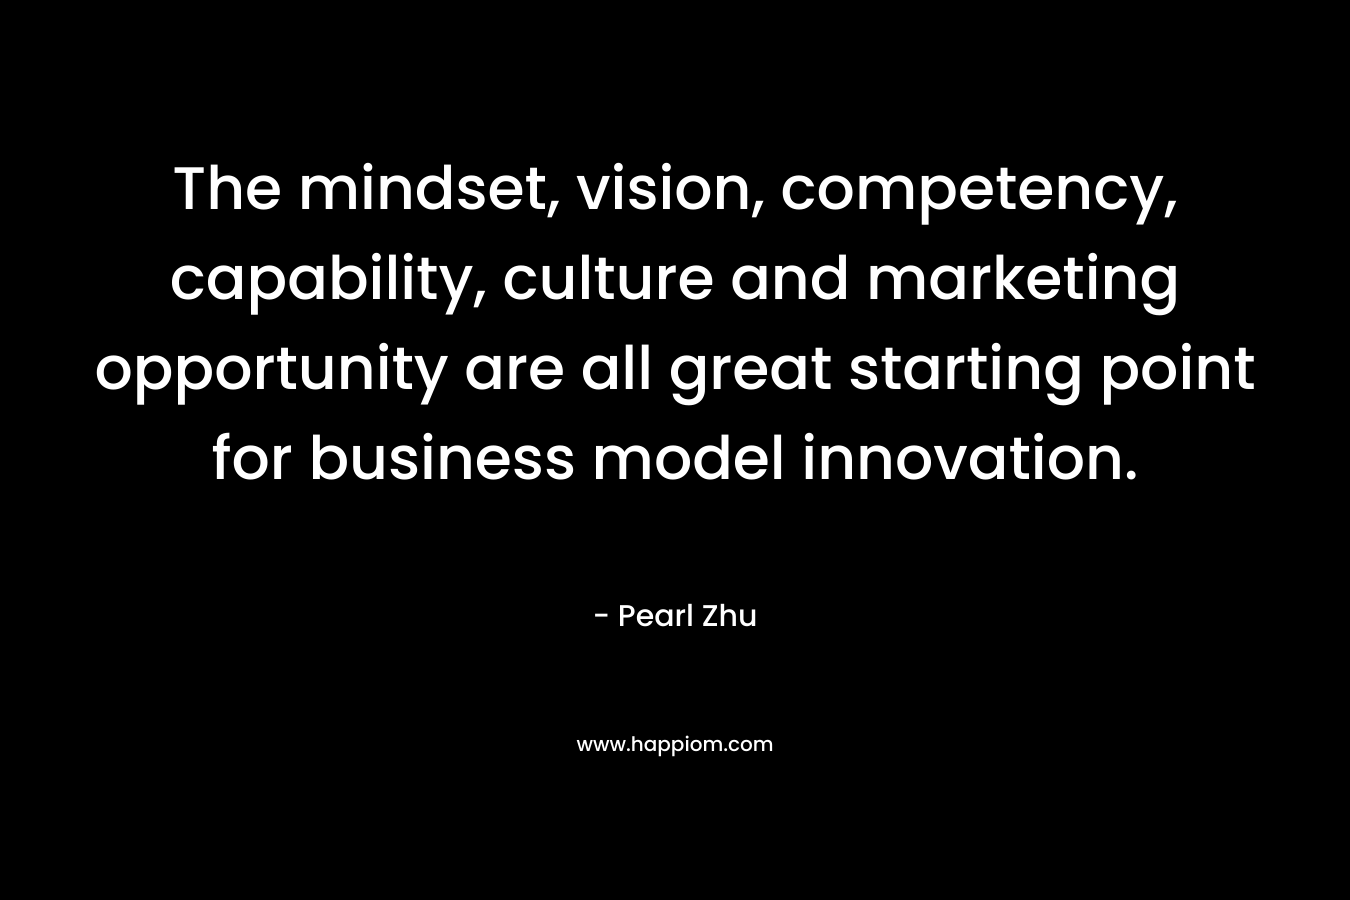 The mindset, vision, competency, capability, culture and marketing opportunity are all great starting point for business model innovation.